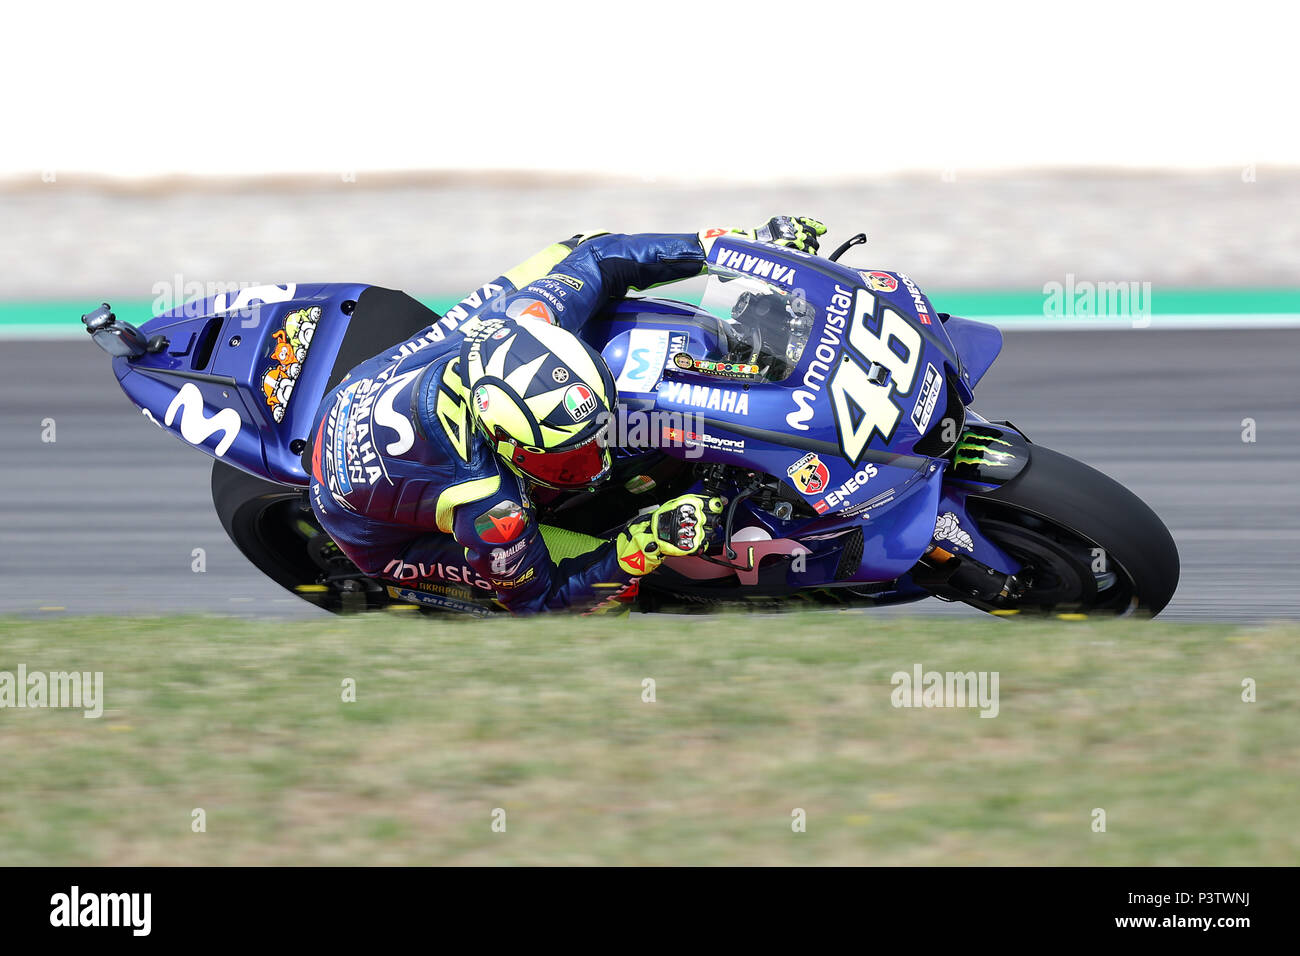 June 15, 2018 - Montmelo, Catalunya, Spain - Valentino ROSSI of Italy and Movistar Yamaha MotoGp competes during Gran Premi Monster Energy de Catalunya (Grand Prix of Catalunya), MotoGP free practrice, on June 16, 2018 at the Catalunya racetrack in Montmelo, near Barcelona, Spain (Credit Image: © Manuel Blondeau via ZUMA Wire) Stock Photo